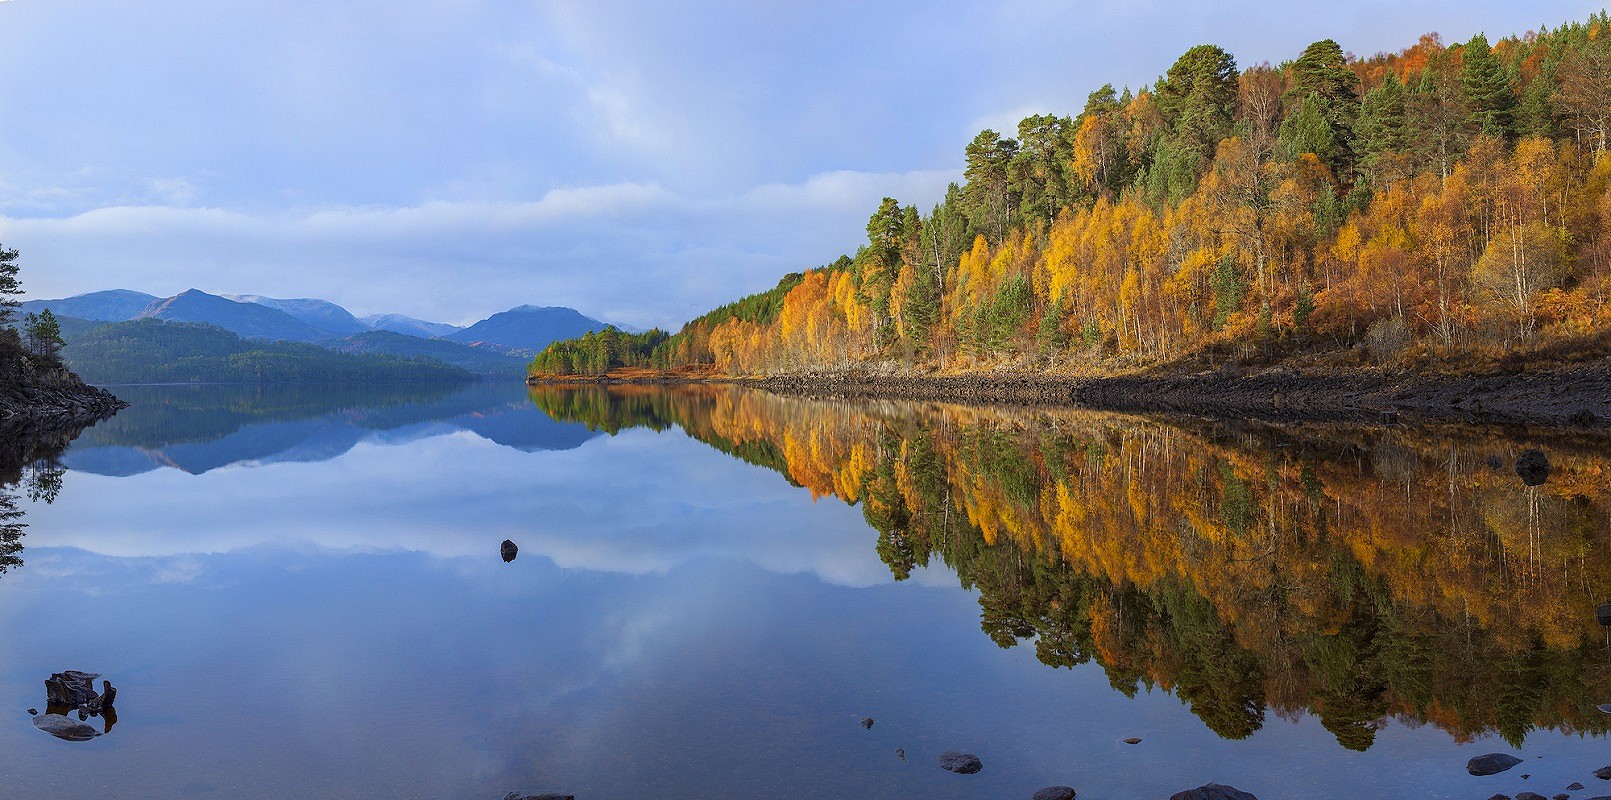 Glen Affric will be the centrepiece of the new rewilding area  © Grant Willoughby